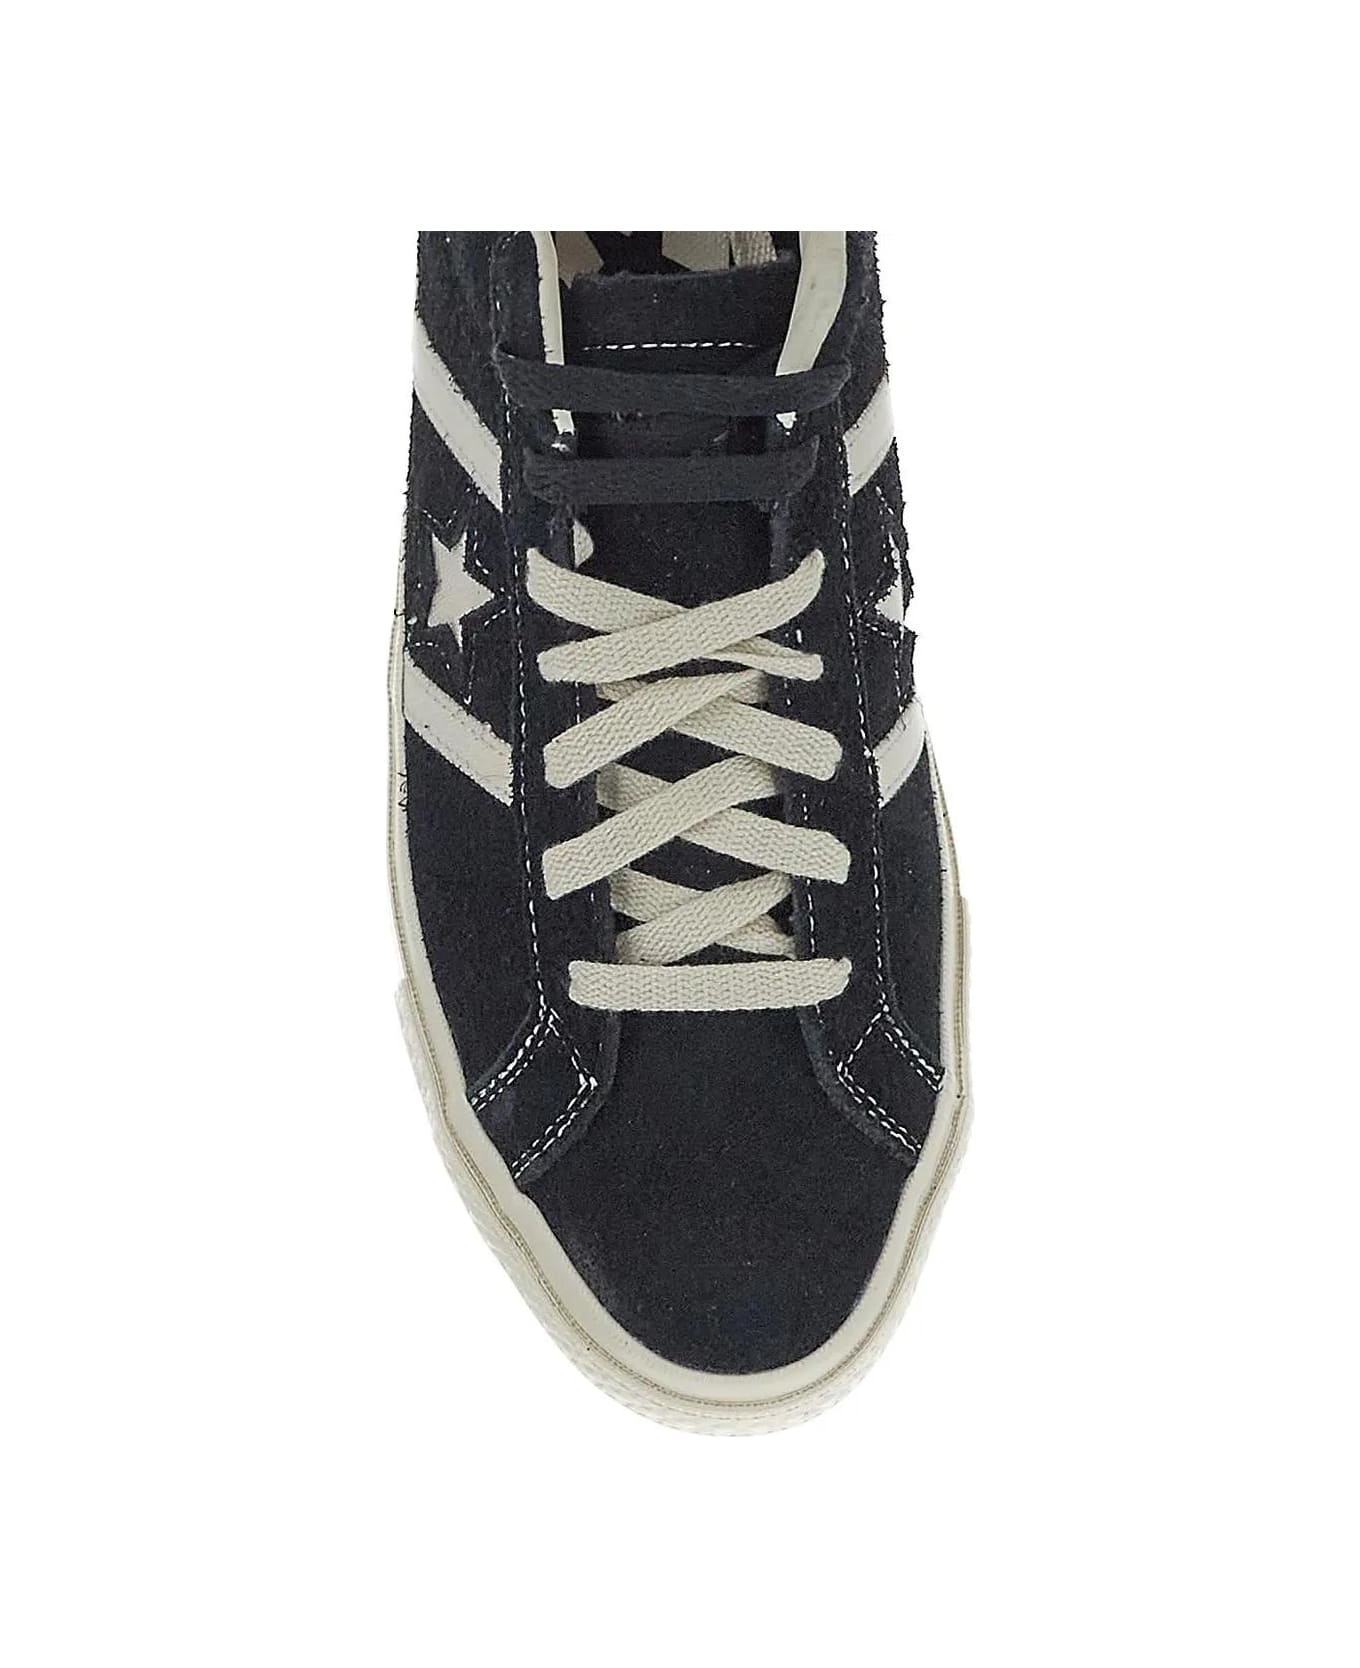 Converse One Star Academy Sneakers - Black